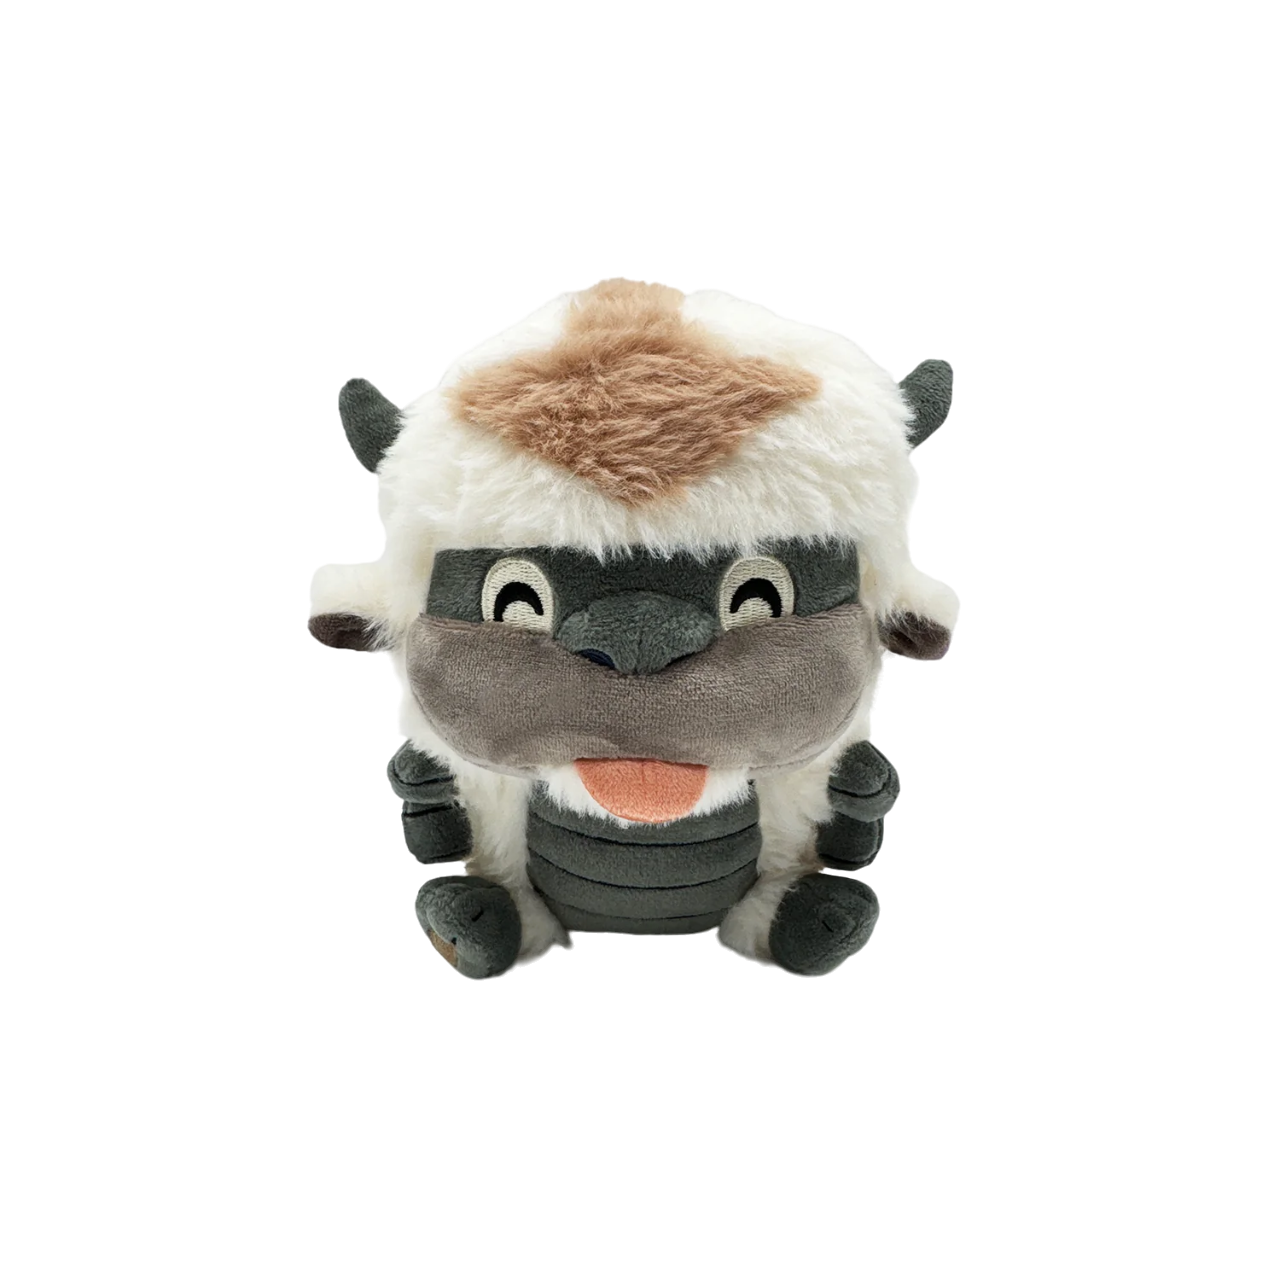 Avatar The Last Airbender Appa Youtooz Stickie Plush (6IN)